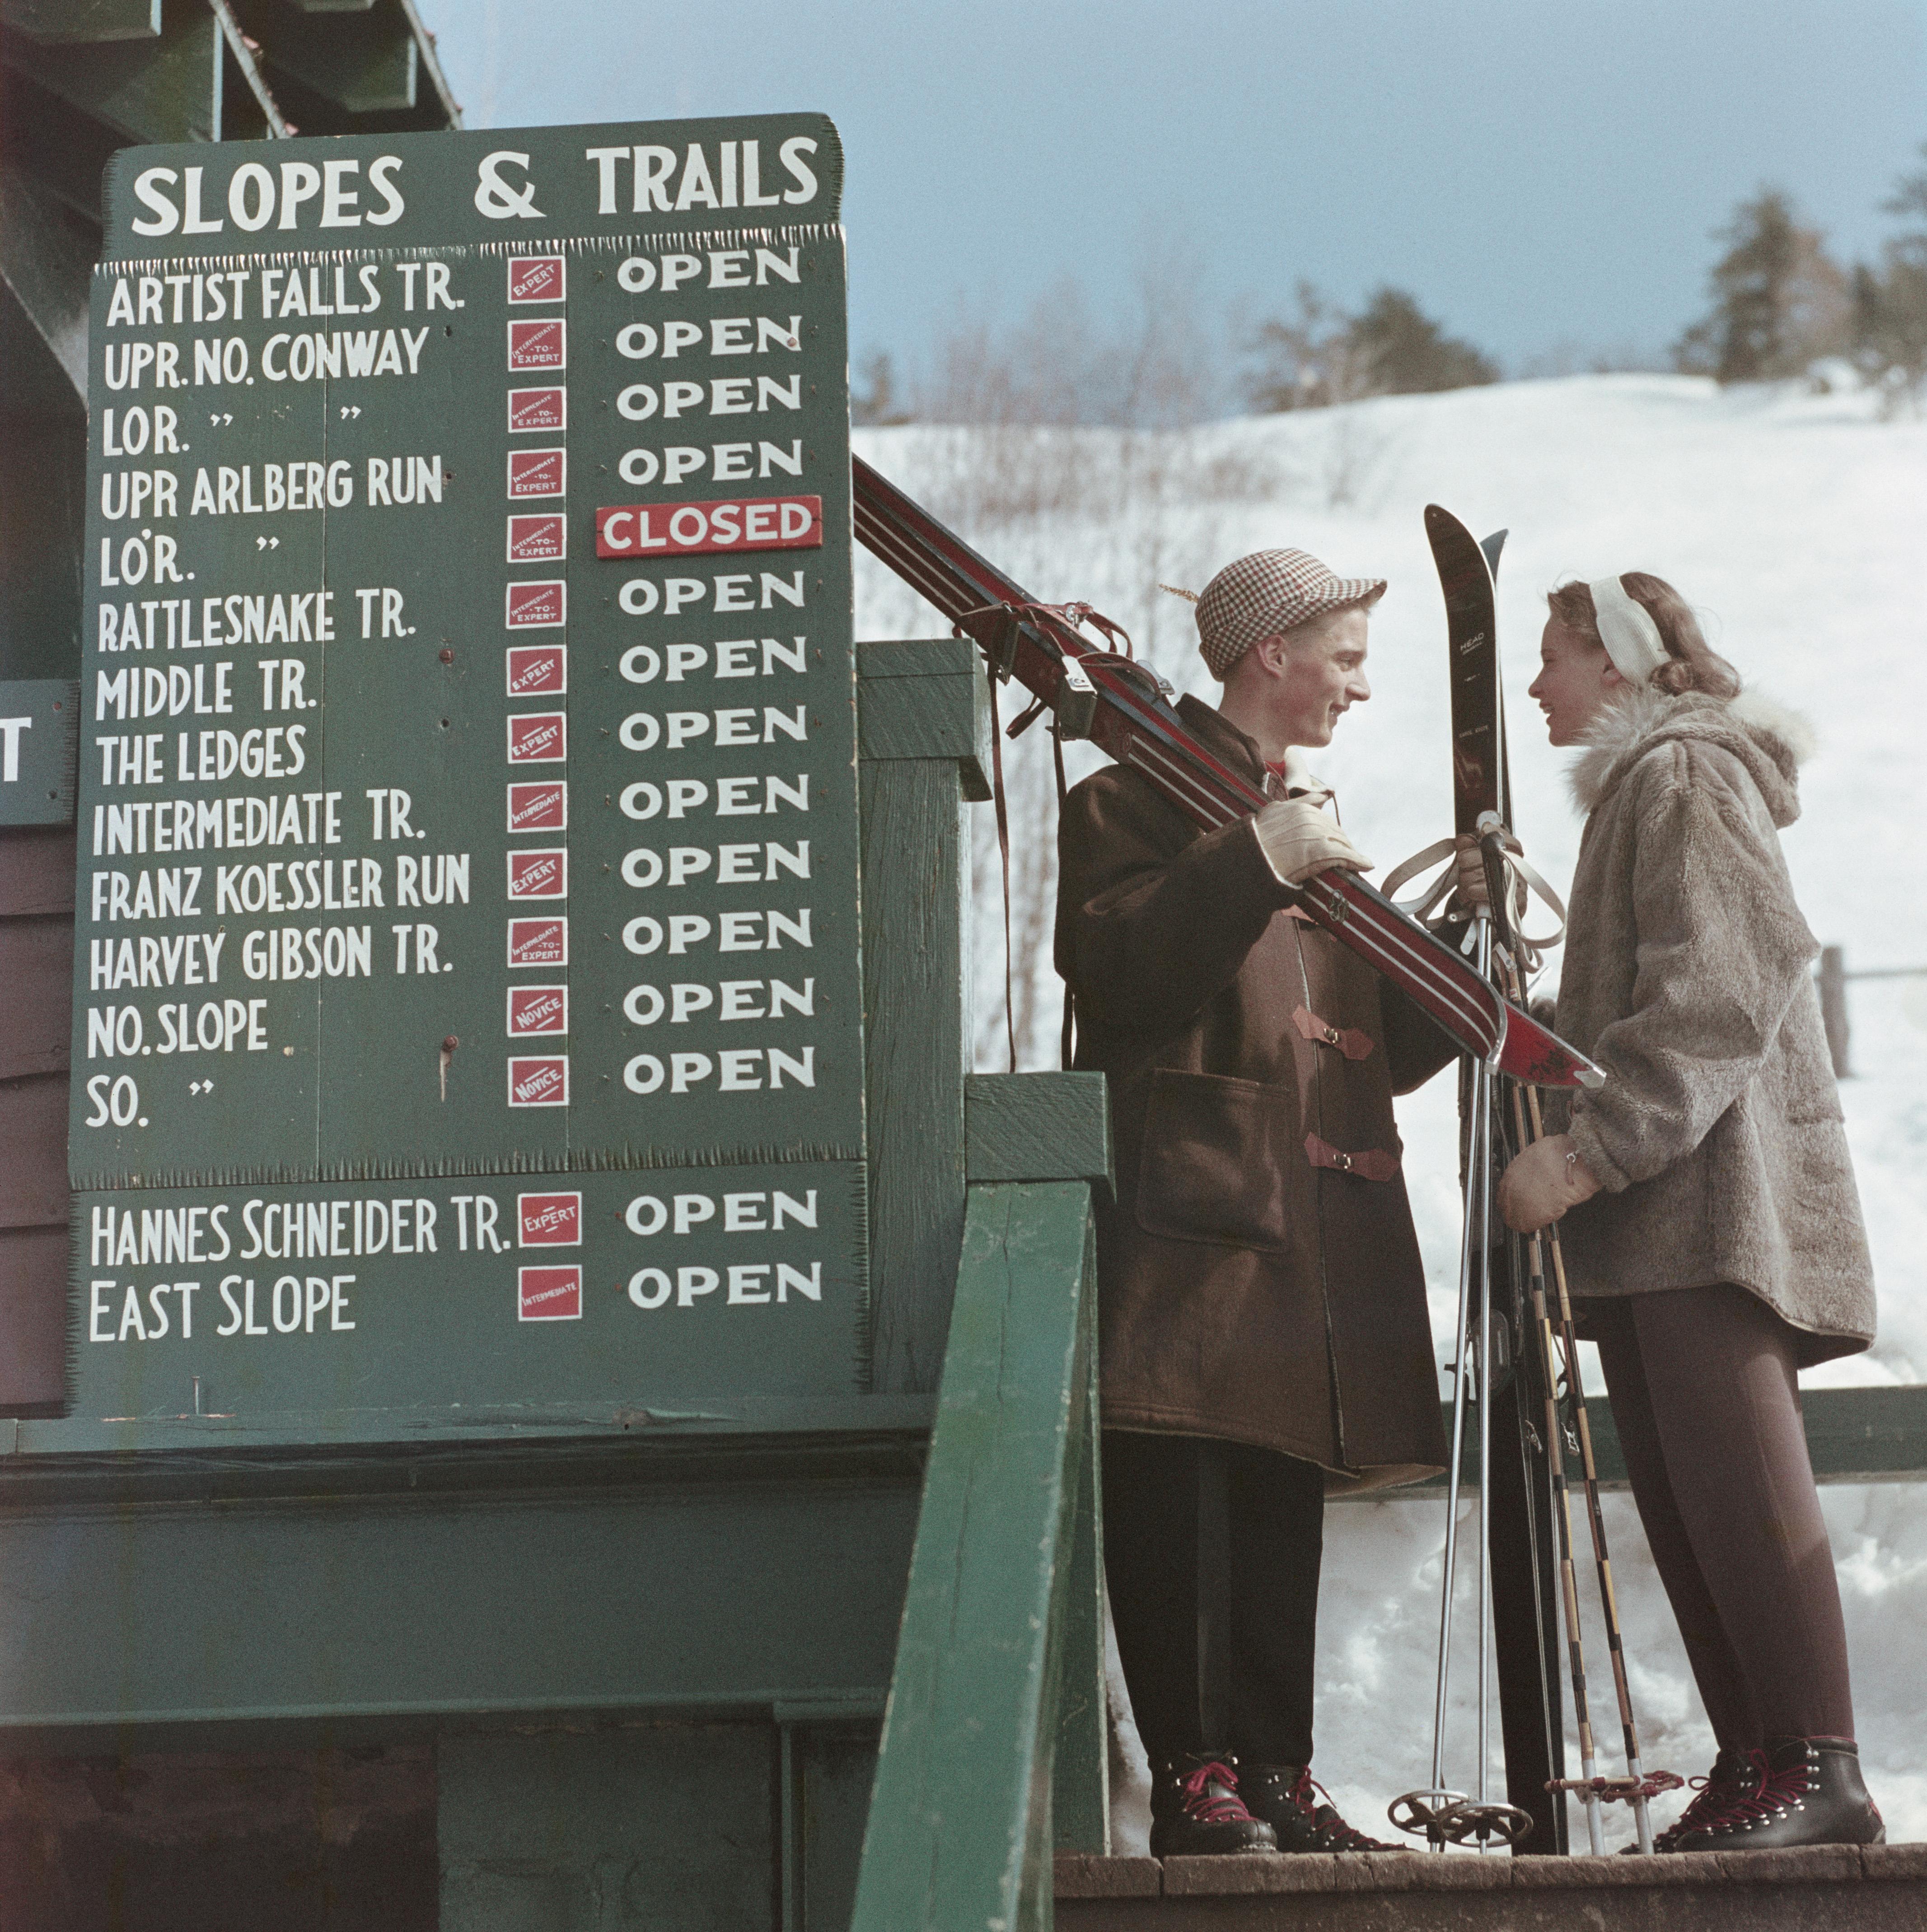 Skiers at the Cranmore Mountain Resort, North Conway, New Hampshire, USA, 1955. 

Once a year, we uncover never-before-seen Slim Aarons images! This is one of fifteen from our new collection. A word from our Curator Shawn Waldron:  ‘For the 2019